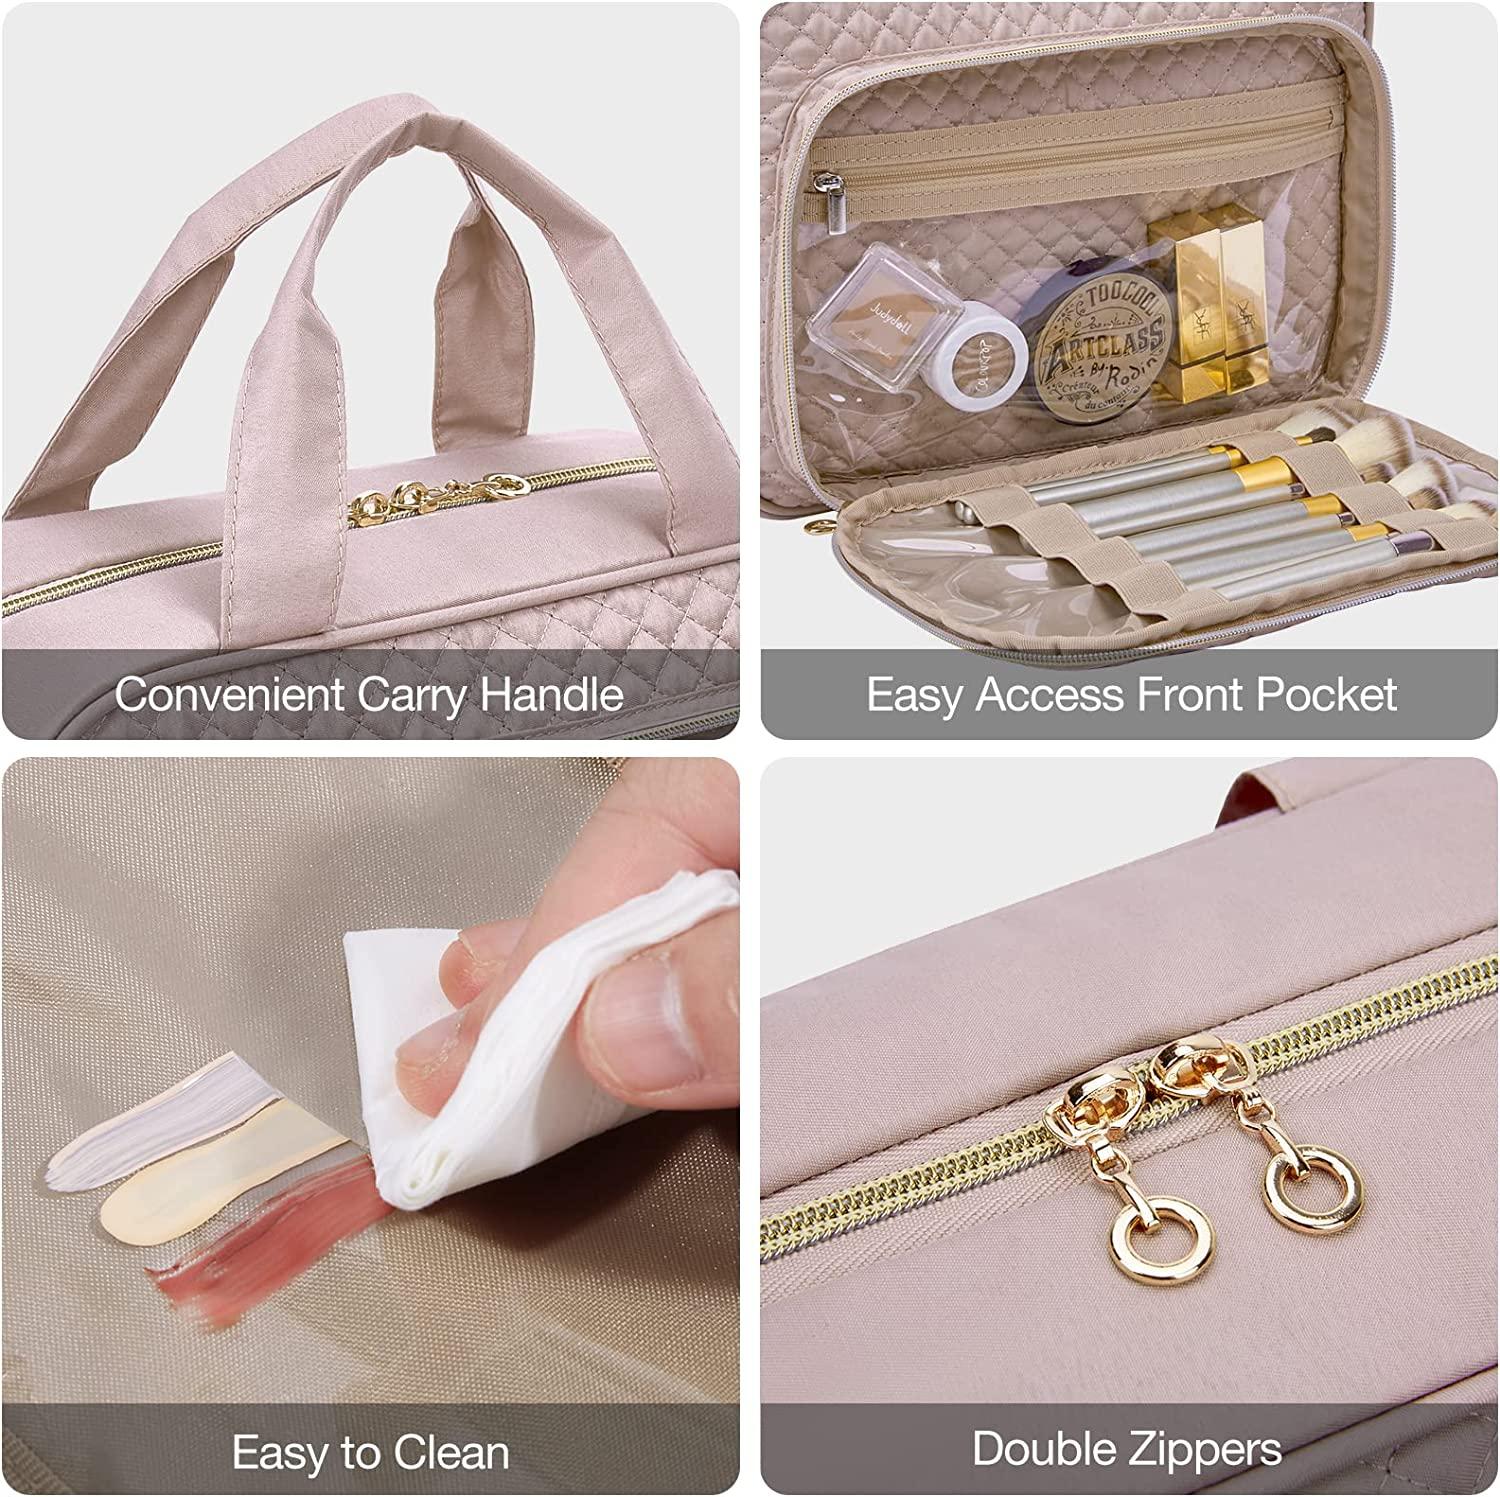 Transparent Travel PVC Cosmetic Bag Makeup Case DIY Clear Make Up Bag Bath  Storage Pouch Toiletry Wash Functional Organizer Bags